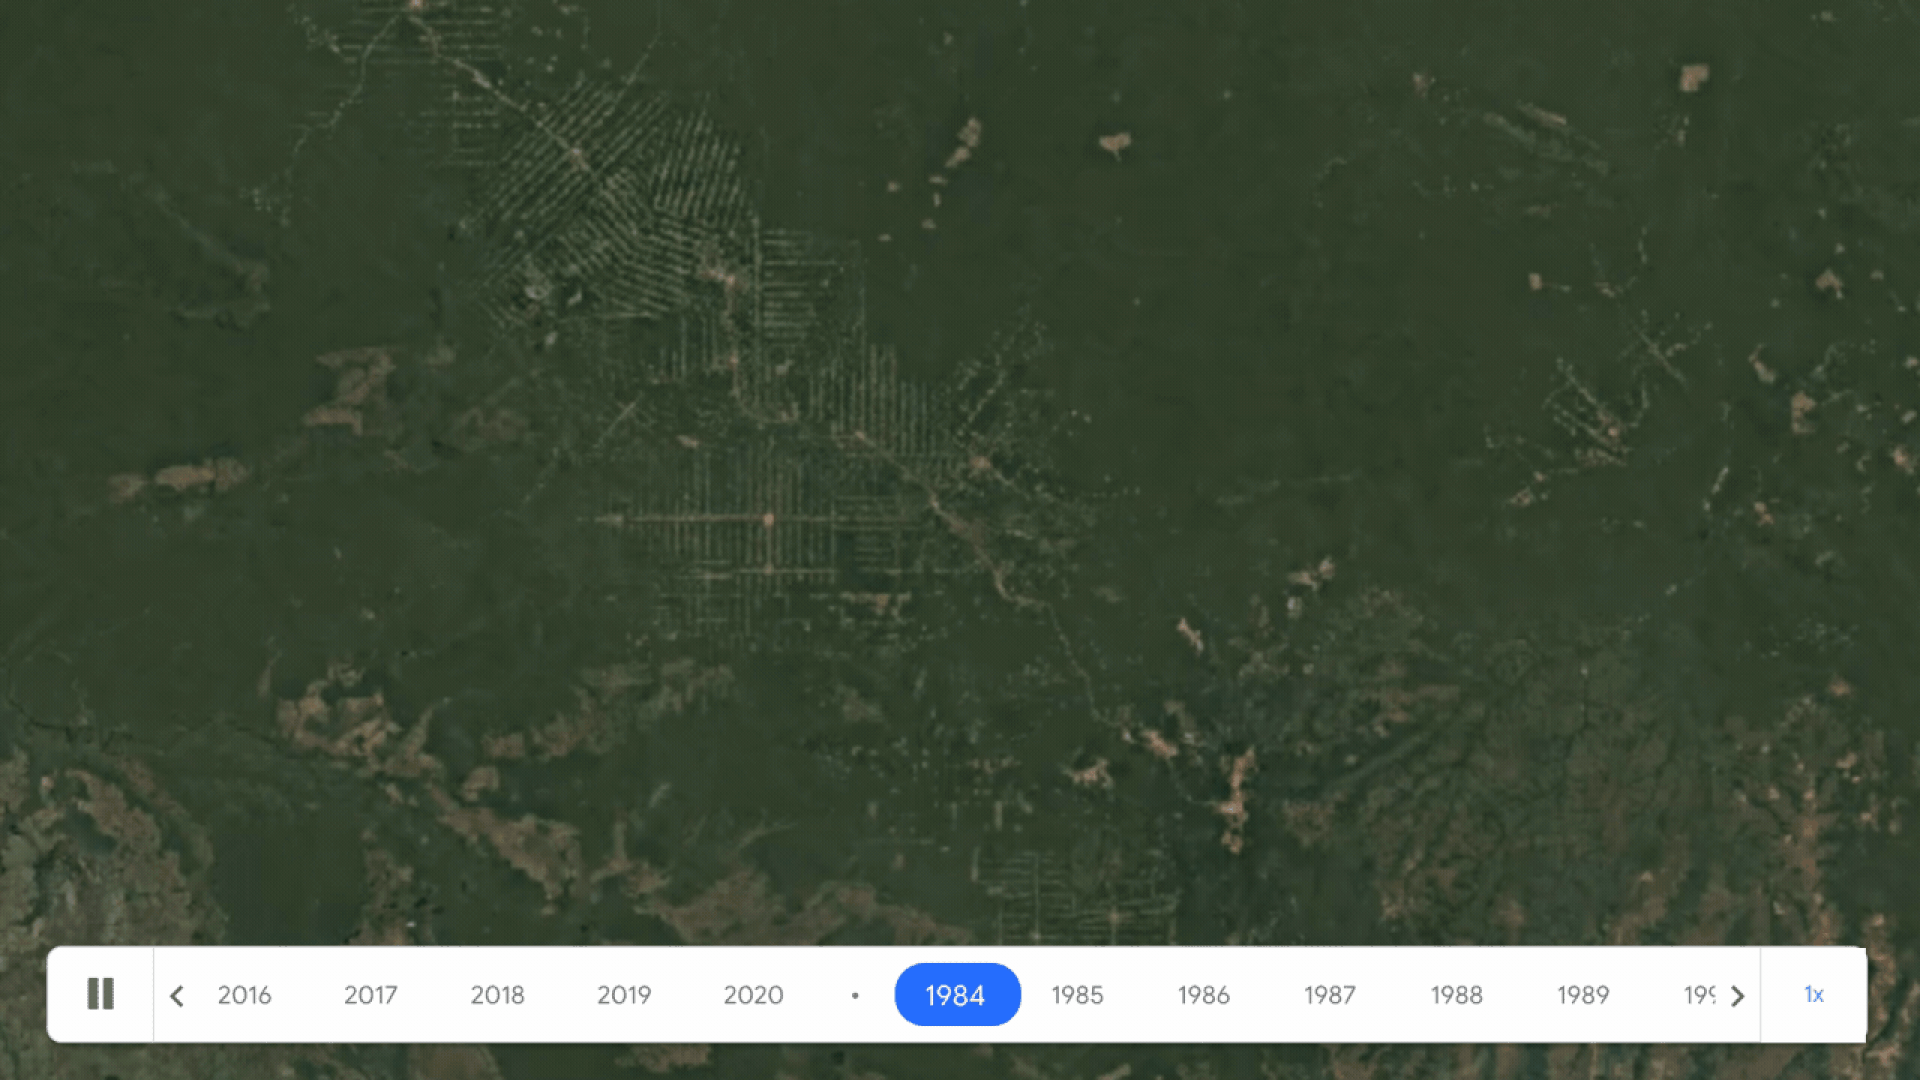 A time lapse of deforestation in the Amazon Rainforest.